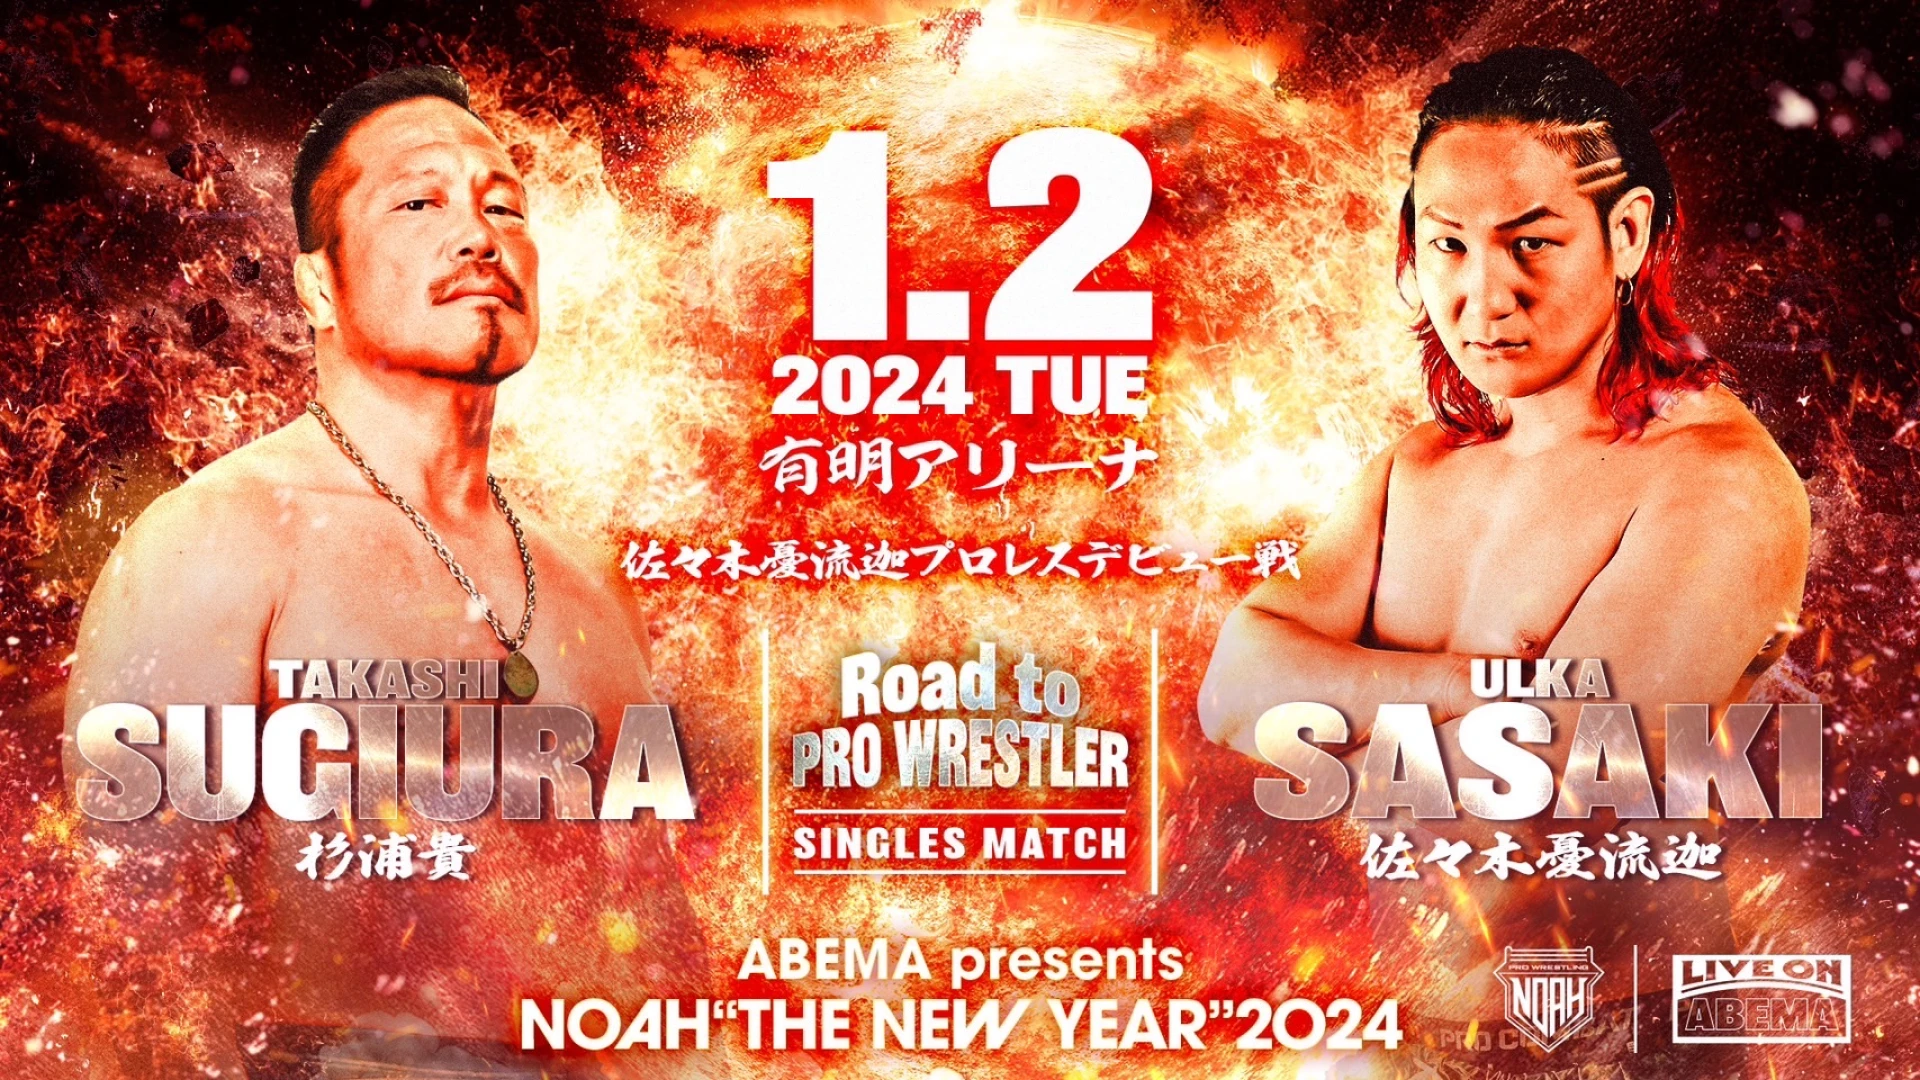 Two Matches Added To NOAH “THE NEW YEAR” 2024 Event Set For 1/2/2024